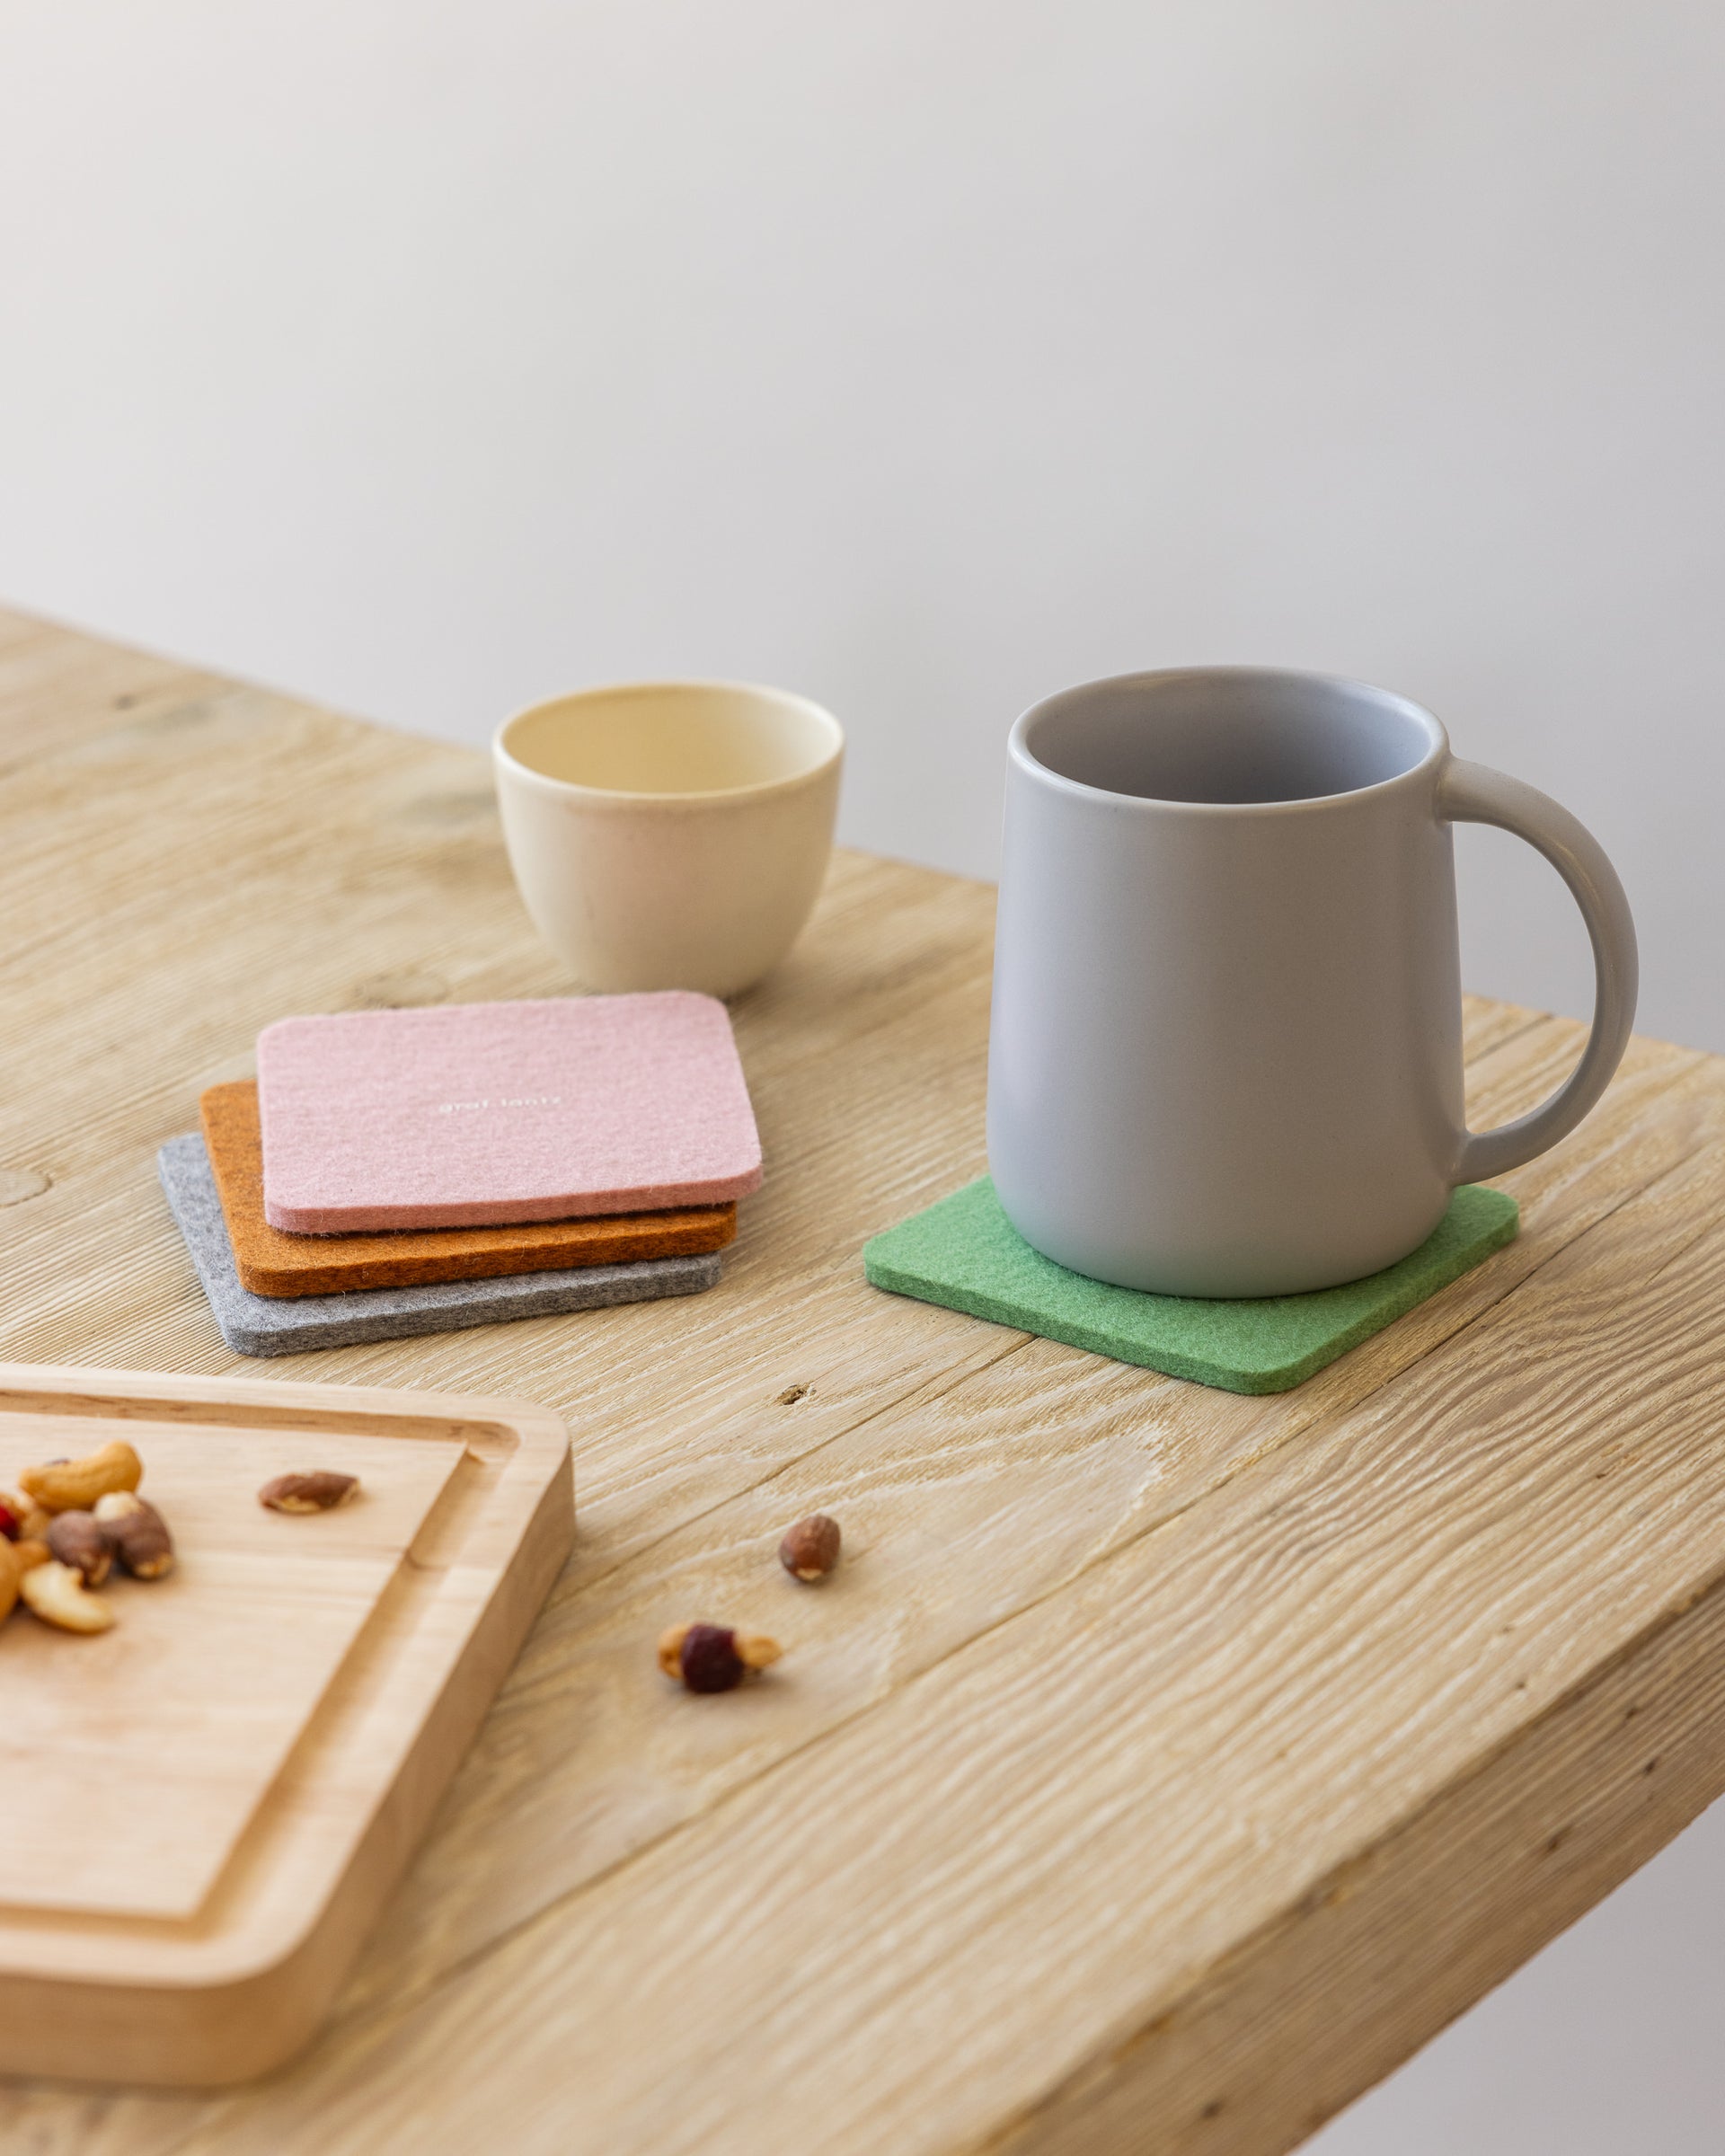 Stack of three square felt coasters, a white mug standing on a green coaster on a wooden tabletop